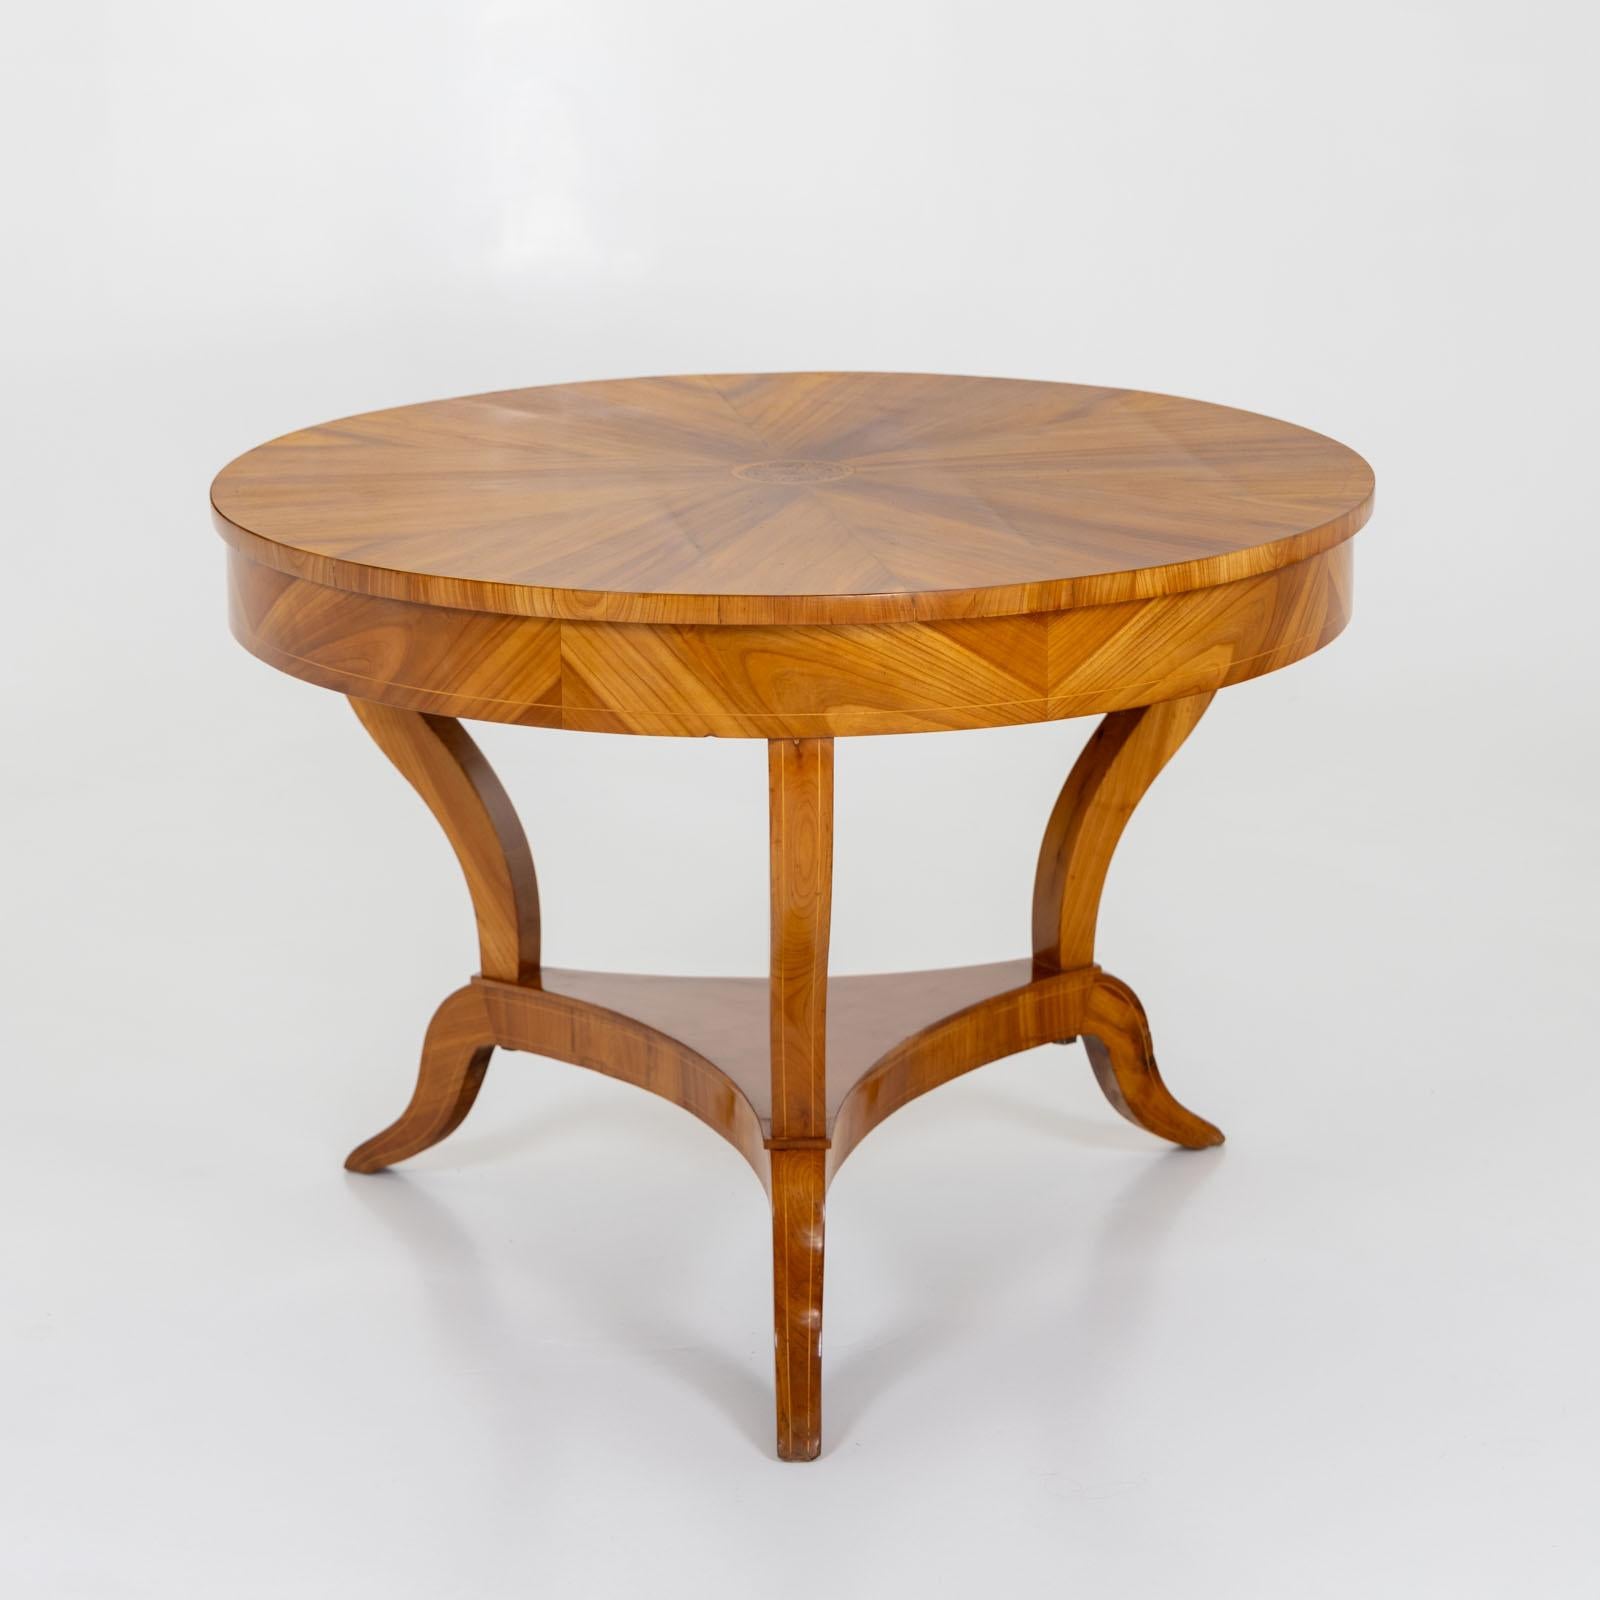 Large Biedermeier salon table on three legs with retracted central column and smooth frame. The radial veneered table top is inlaid in the middle with a stylized floral pattern, the frame and legs are set off with light thread inlays. The table is